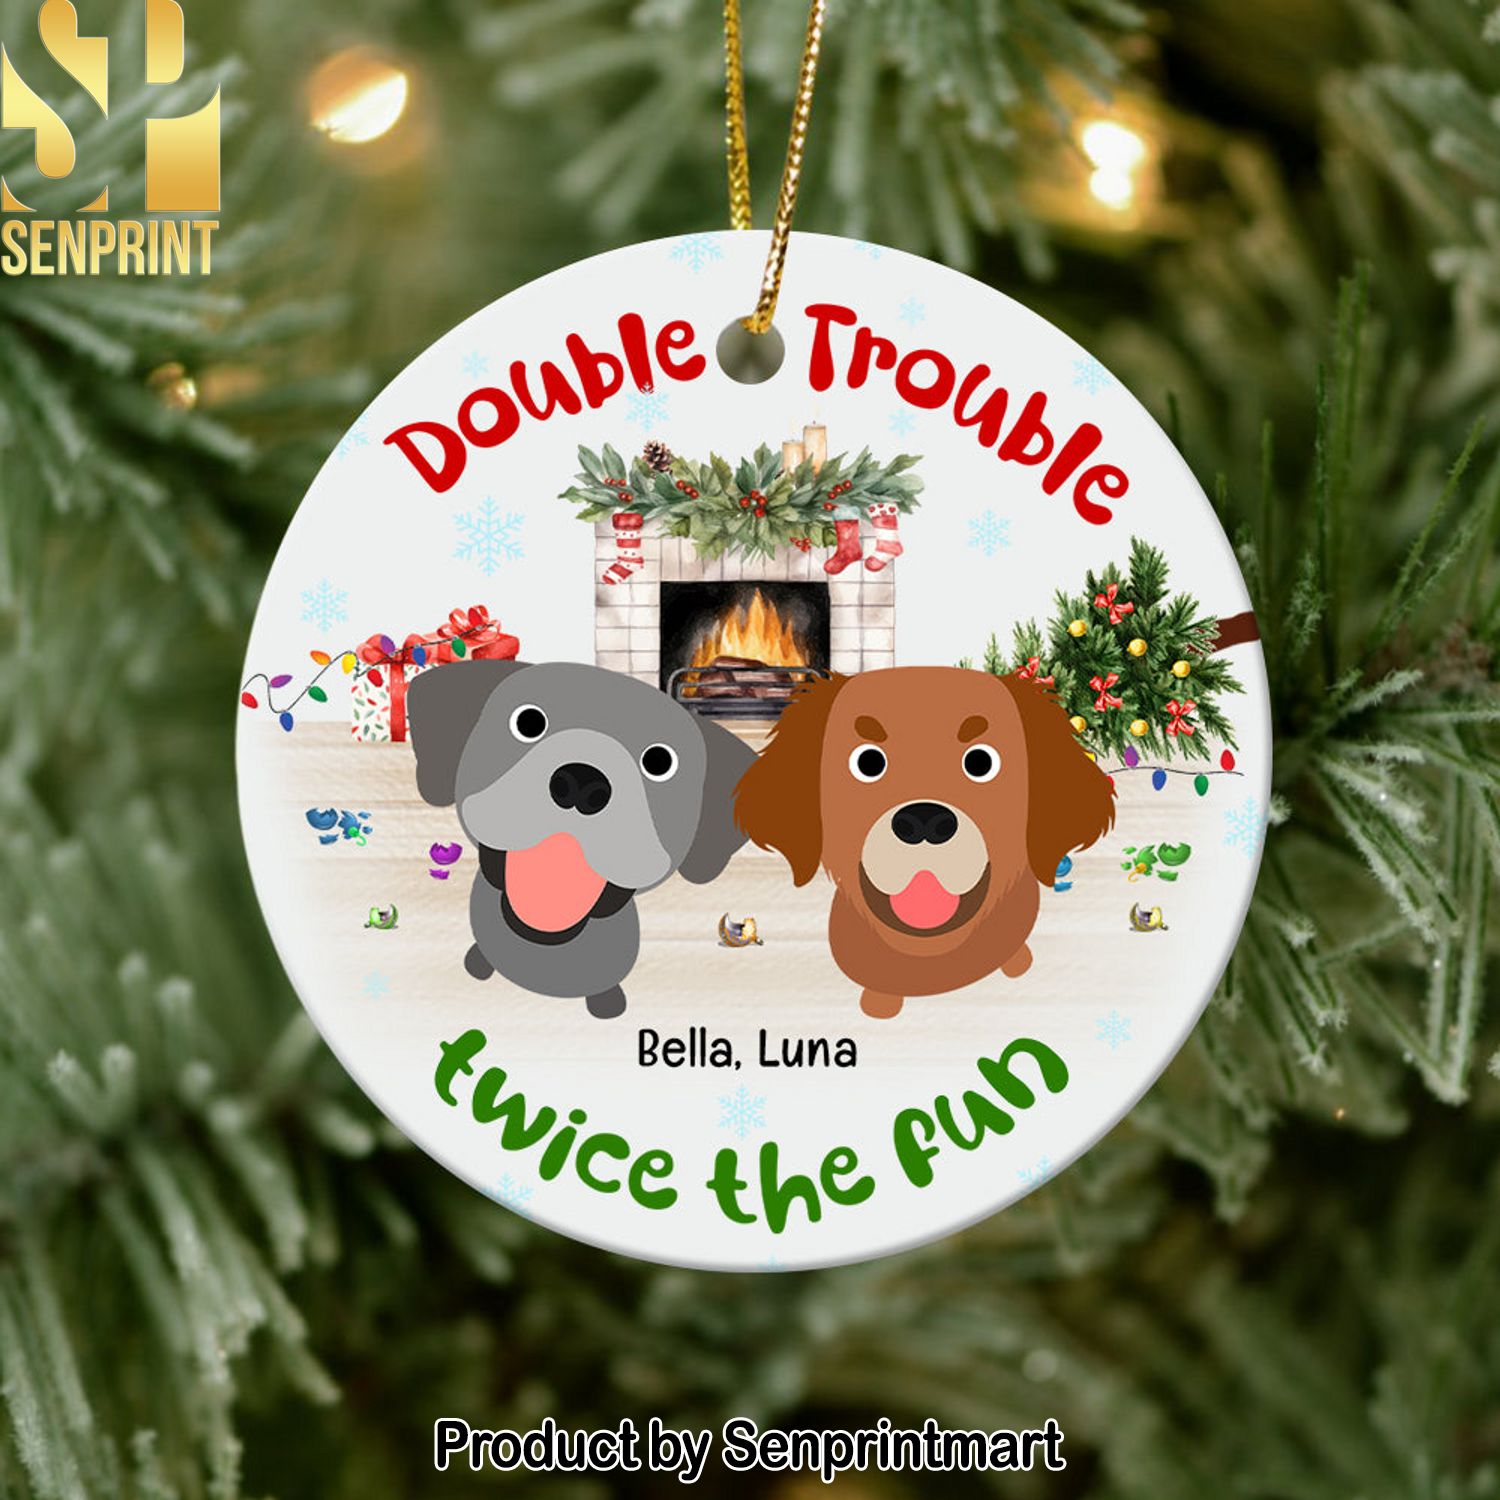 Double Trouble Twice The Fun Personalized Ornament Ceramic Circle Ornament Gift For Dog Lover Christmas Gifts